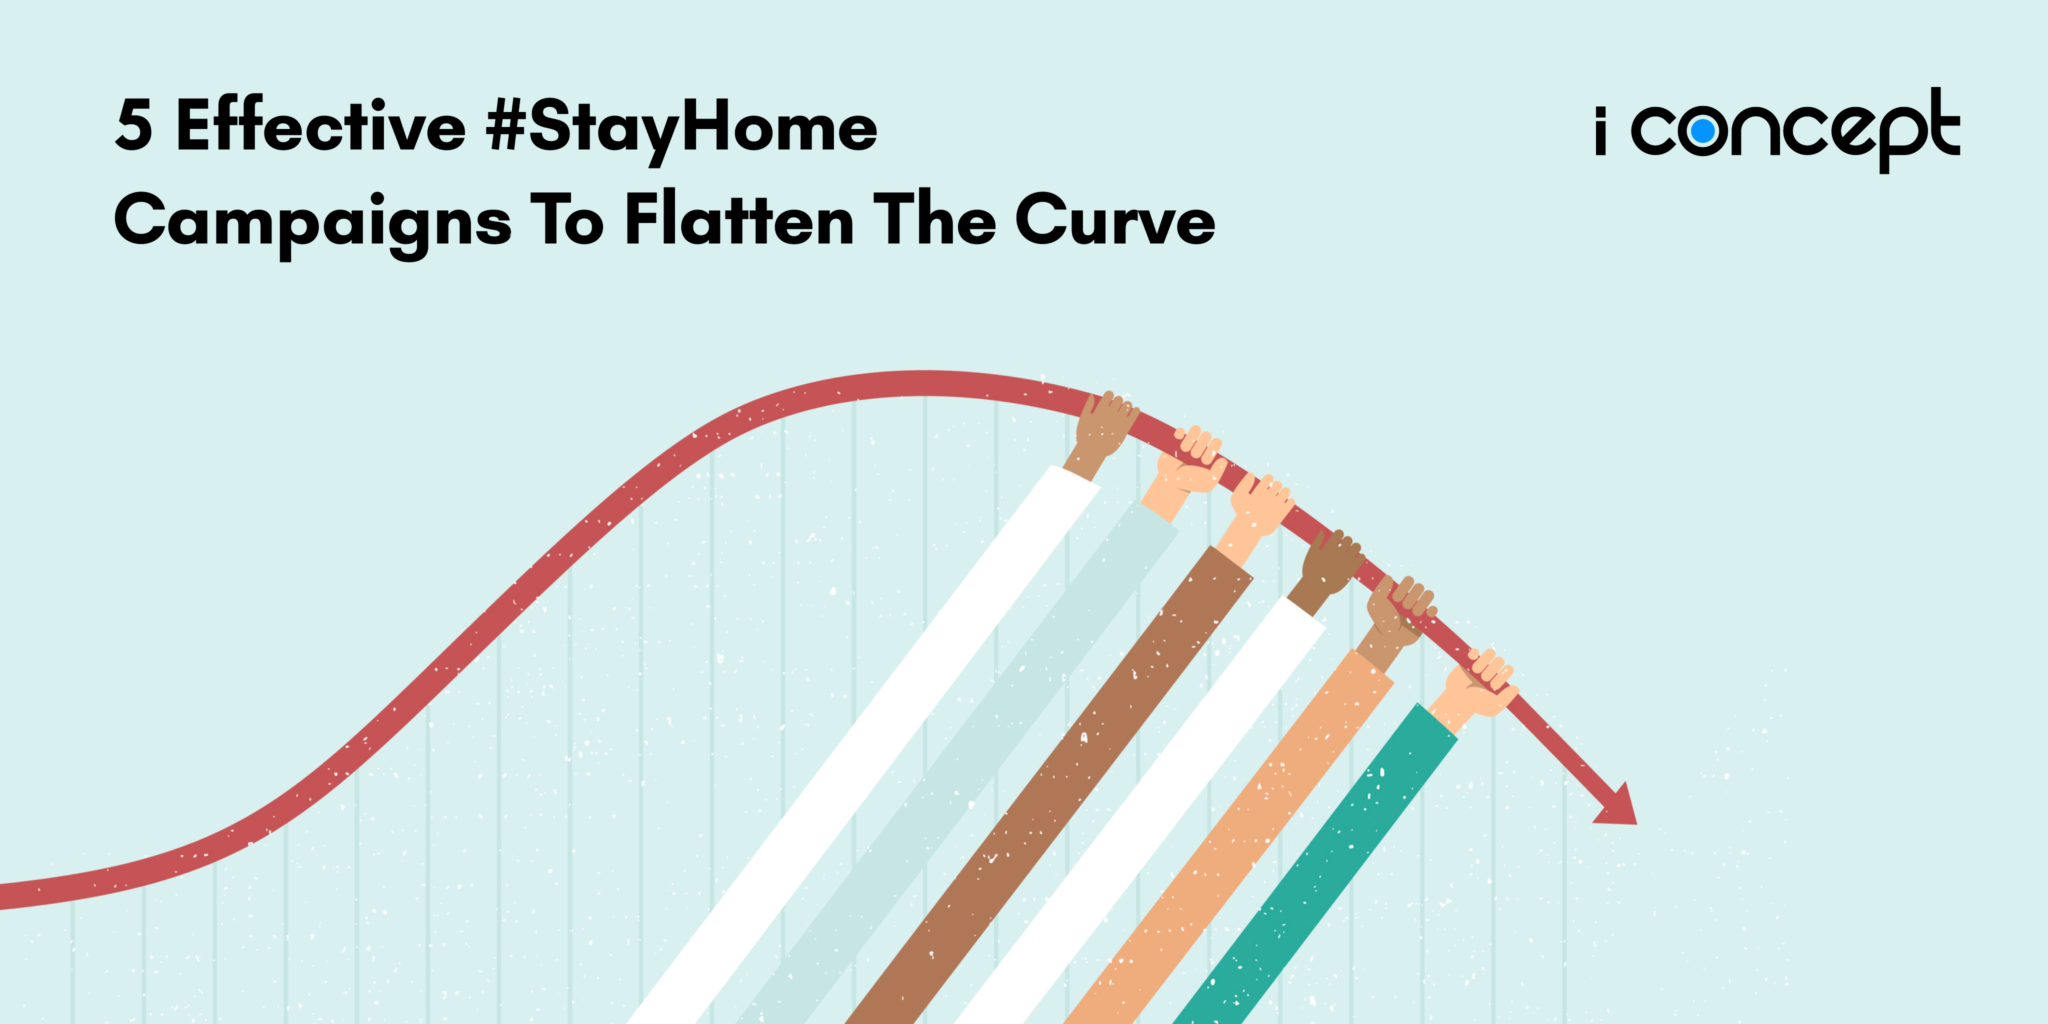 #StayHome Campaigns To Flatten The Curve